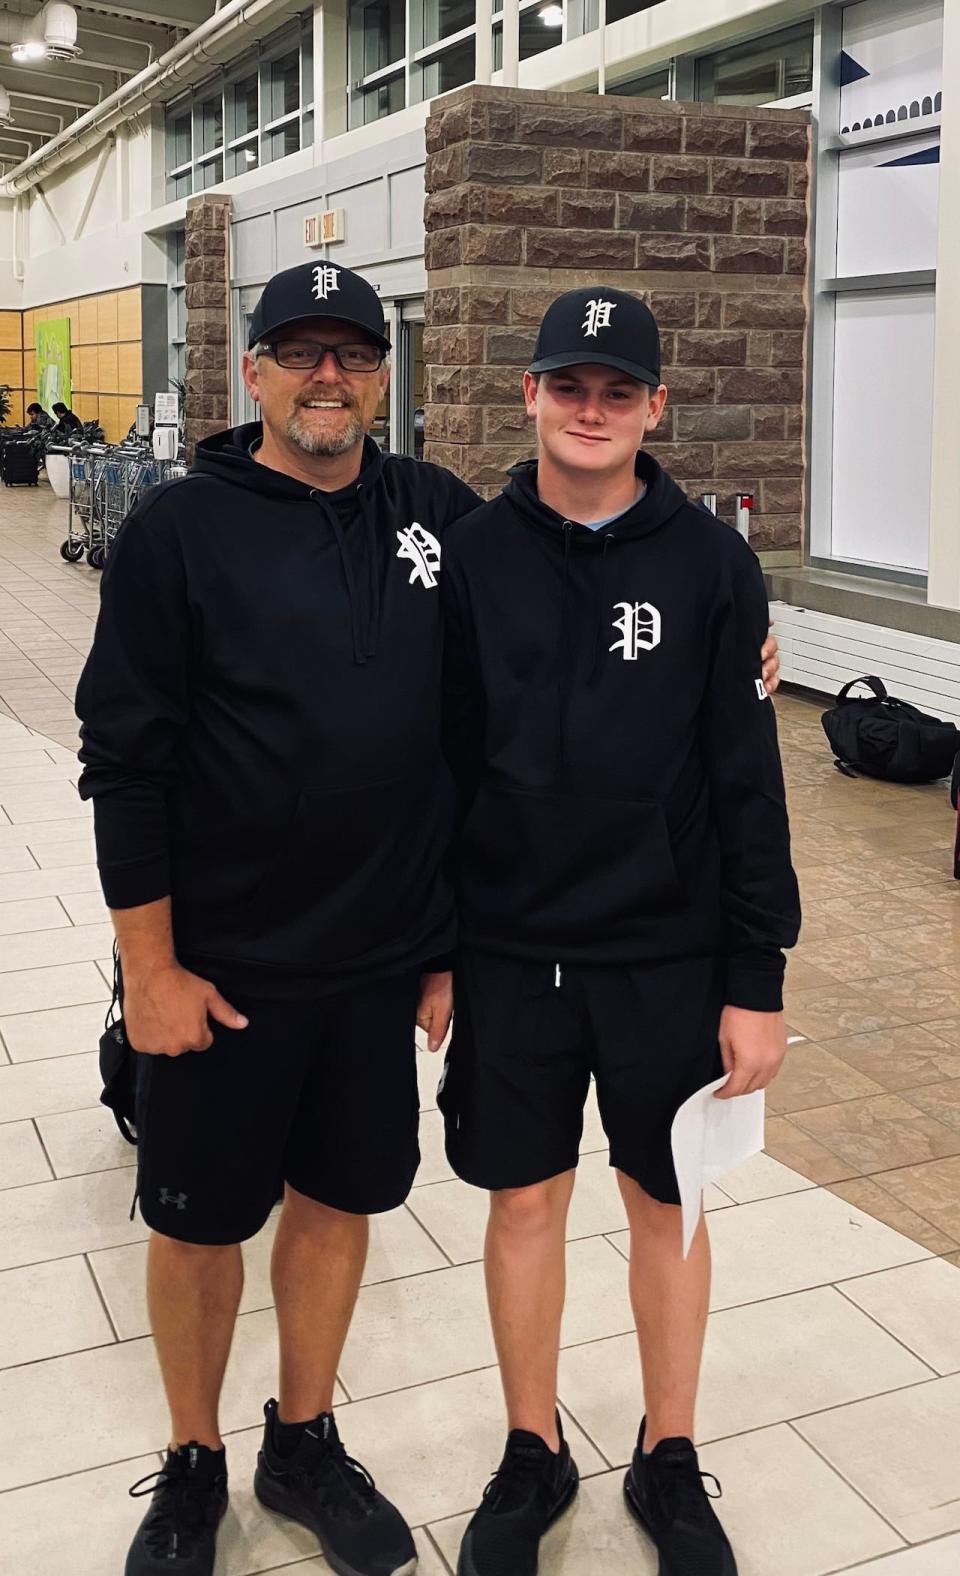 Christopher Drummond had travelled to Quebec with his family for a baseball championship, He said they're trying to raise awarenesss about the issue with the event organizing committee as well. 